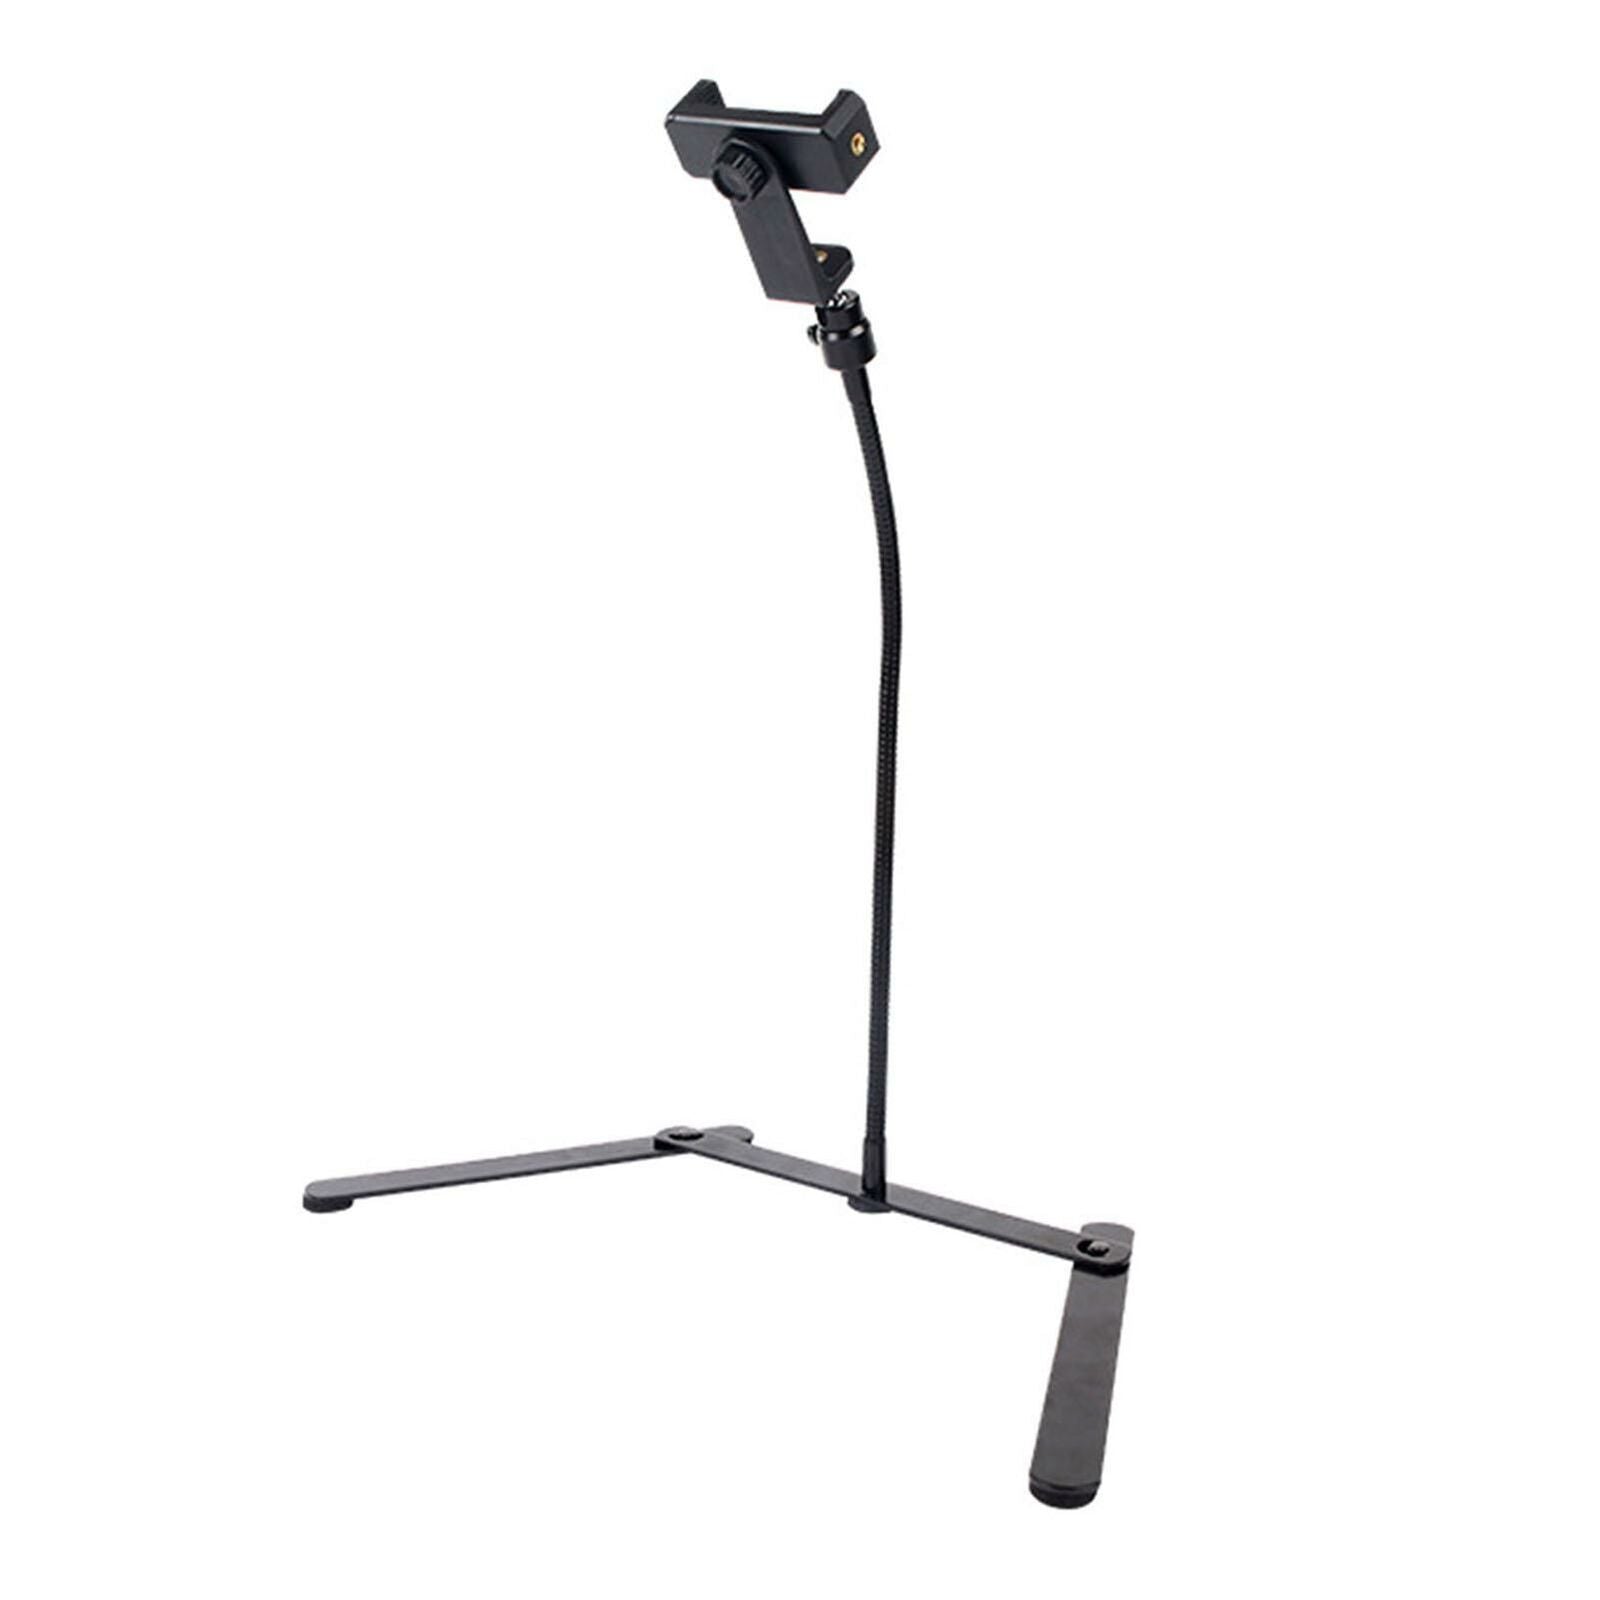 Phone Stand Tripod With Holder Overhead Stand For Live Streaming Teaching Online